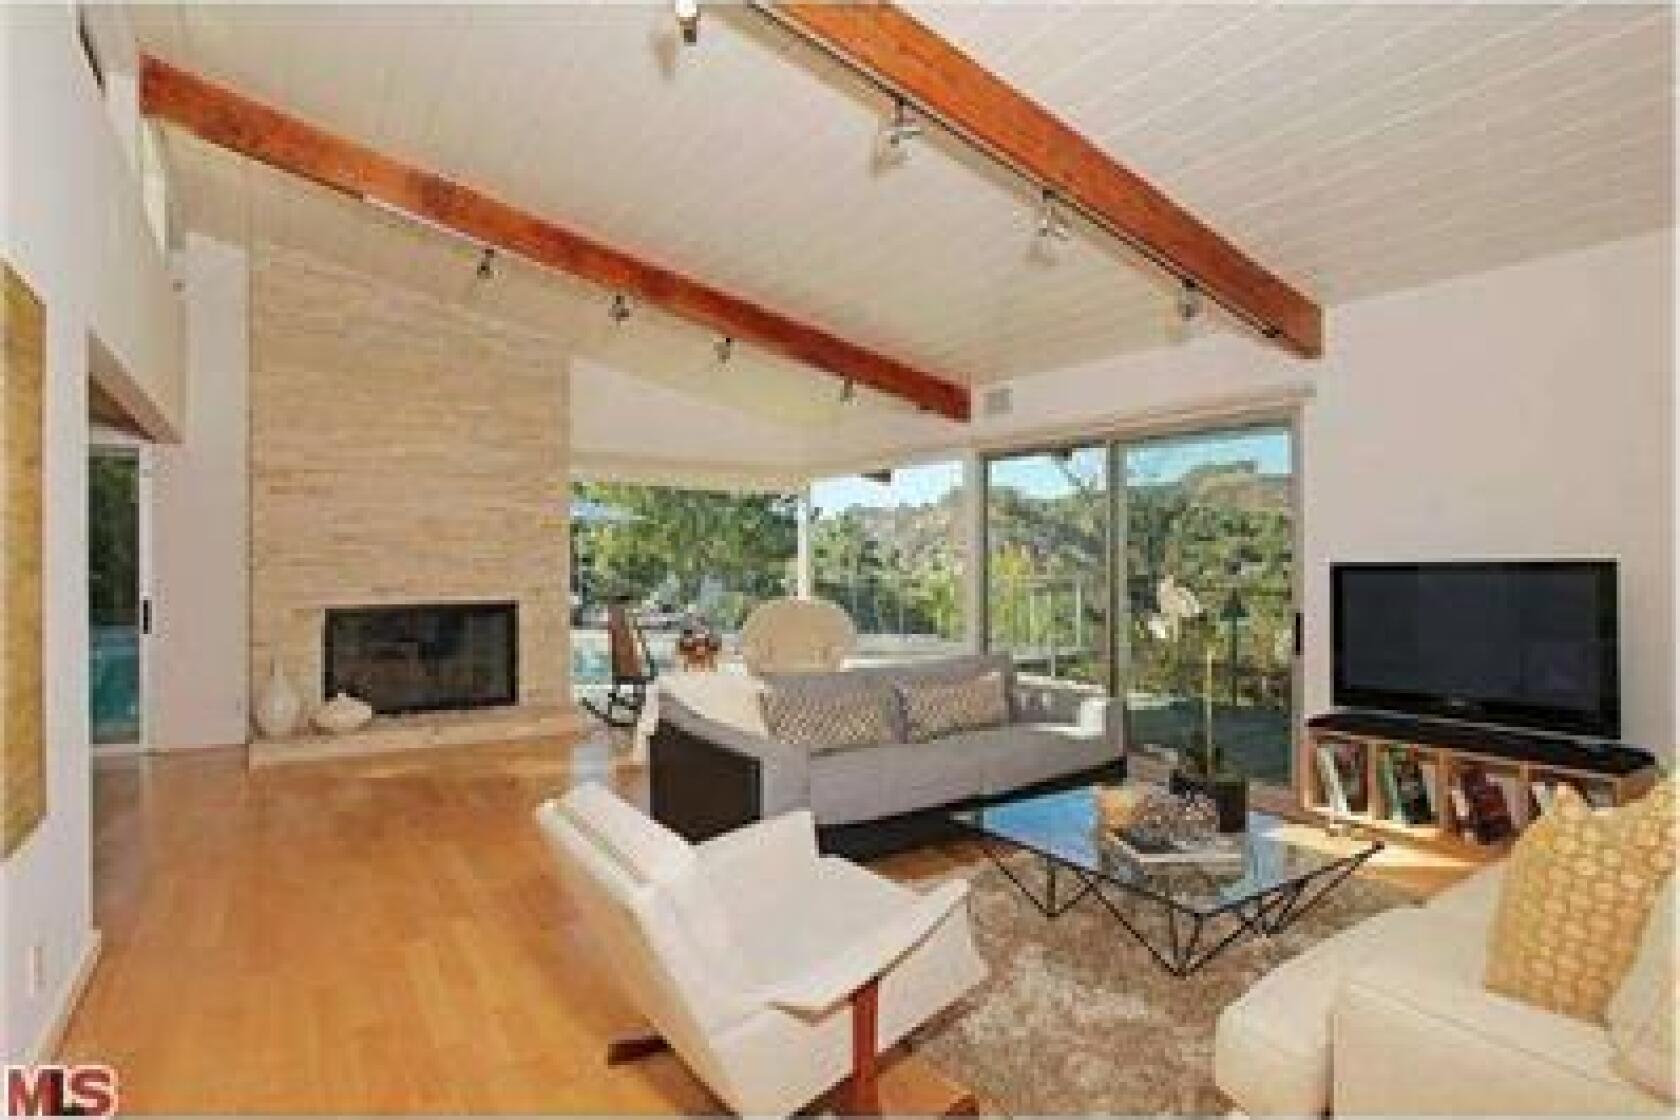 Venus Williams Puts Hollywood Hills West Home Up For Sale